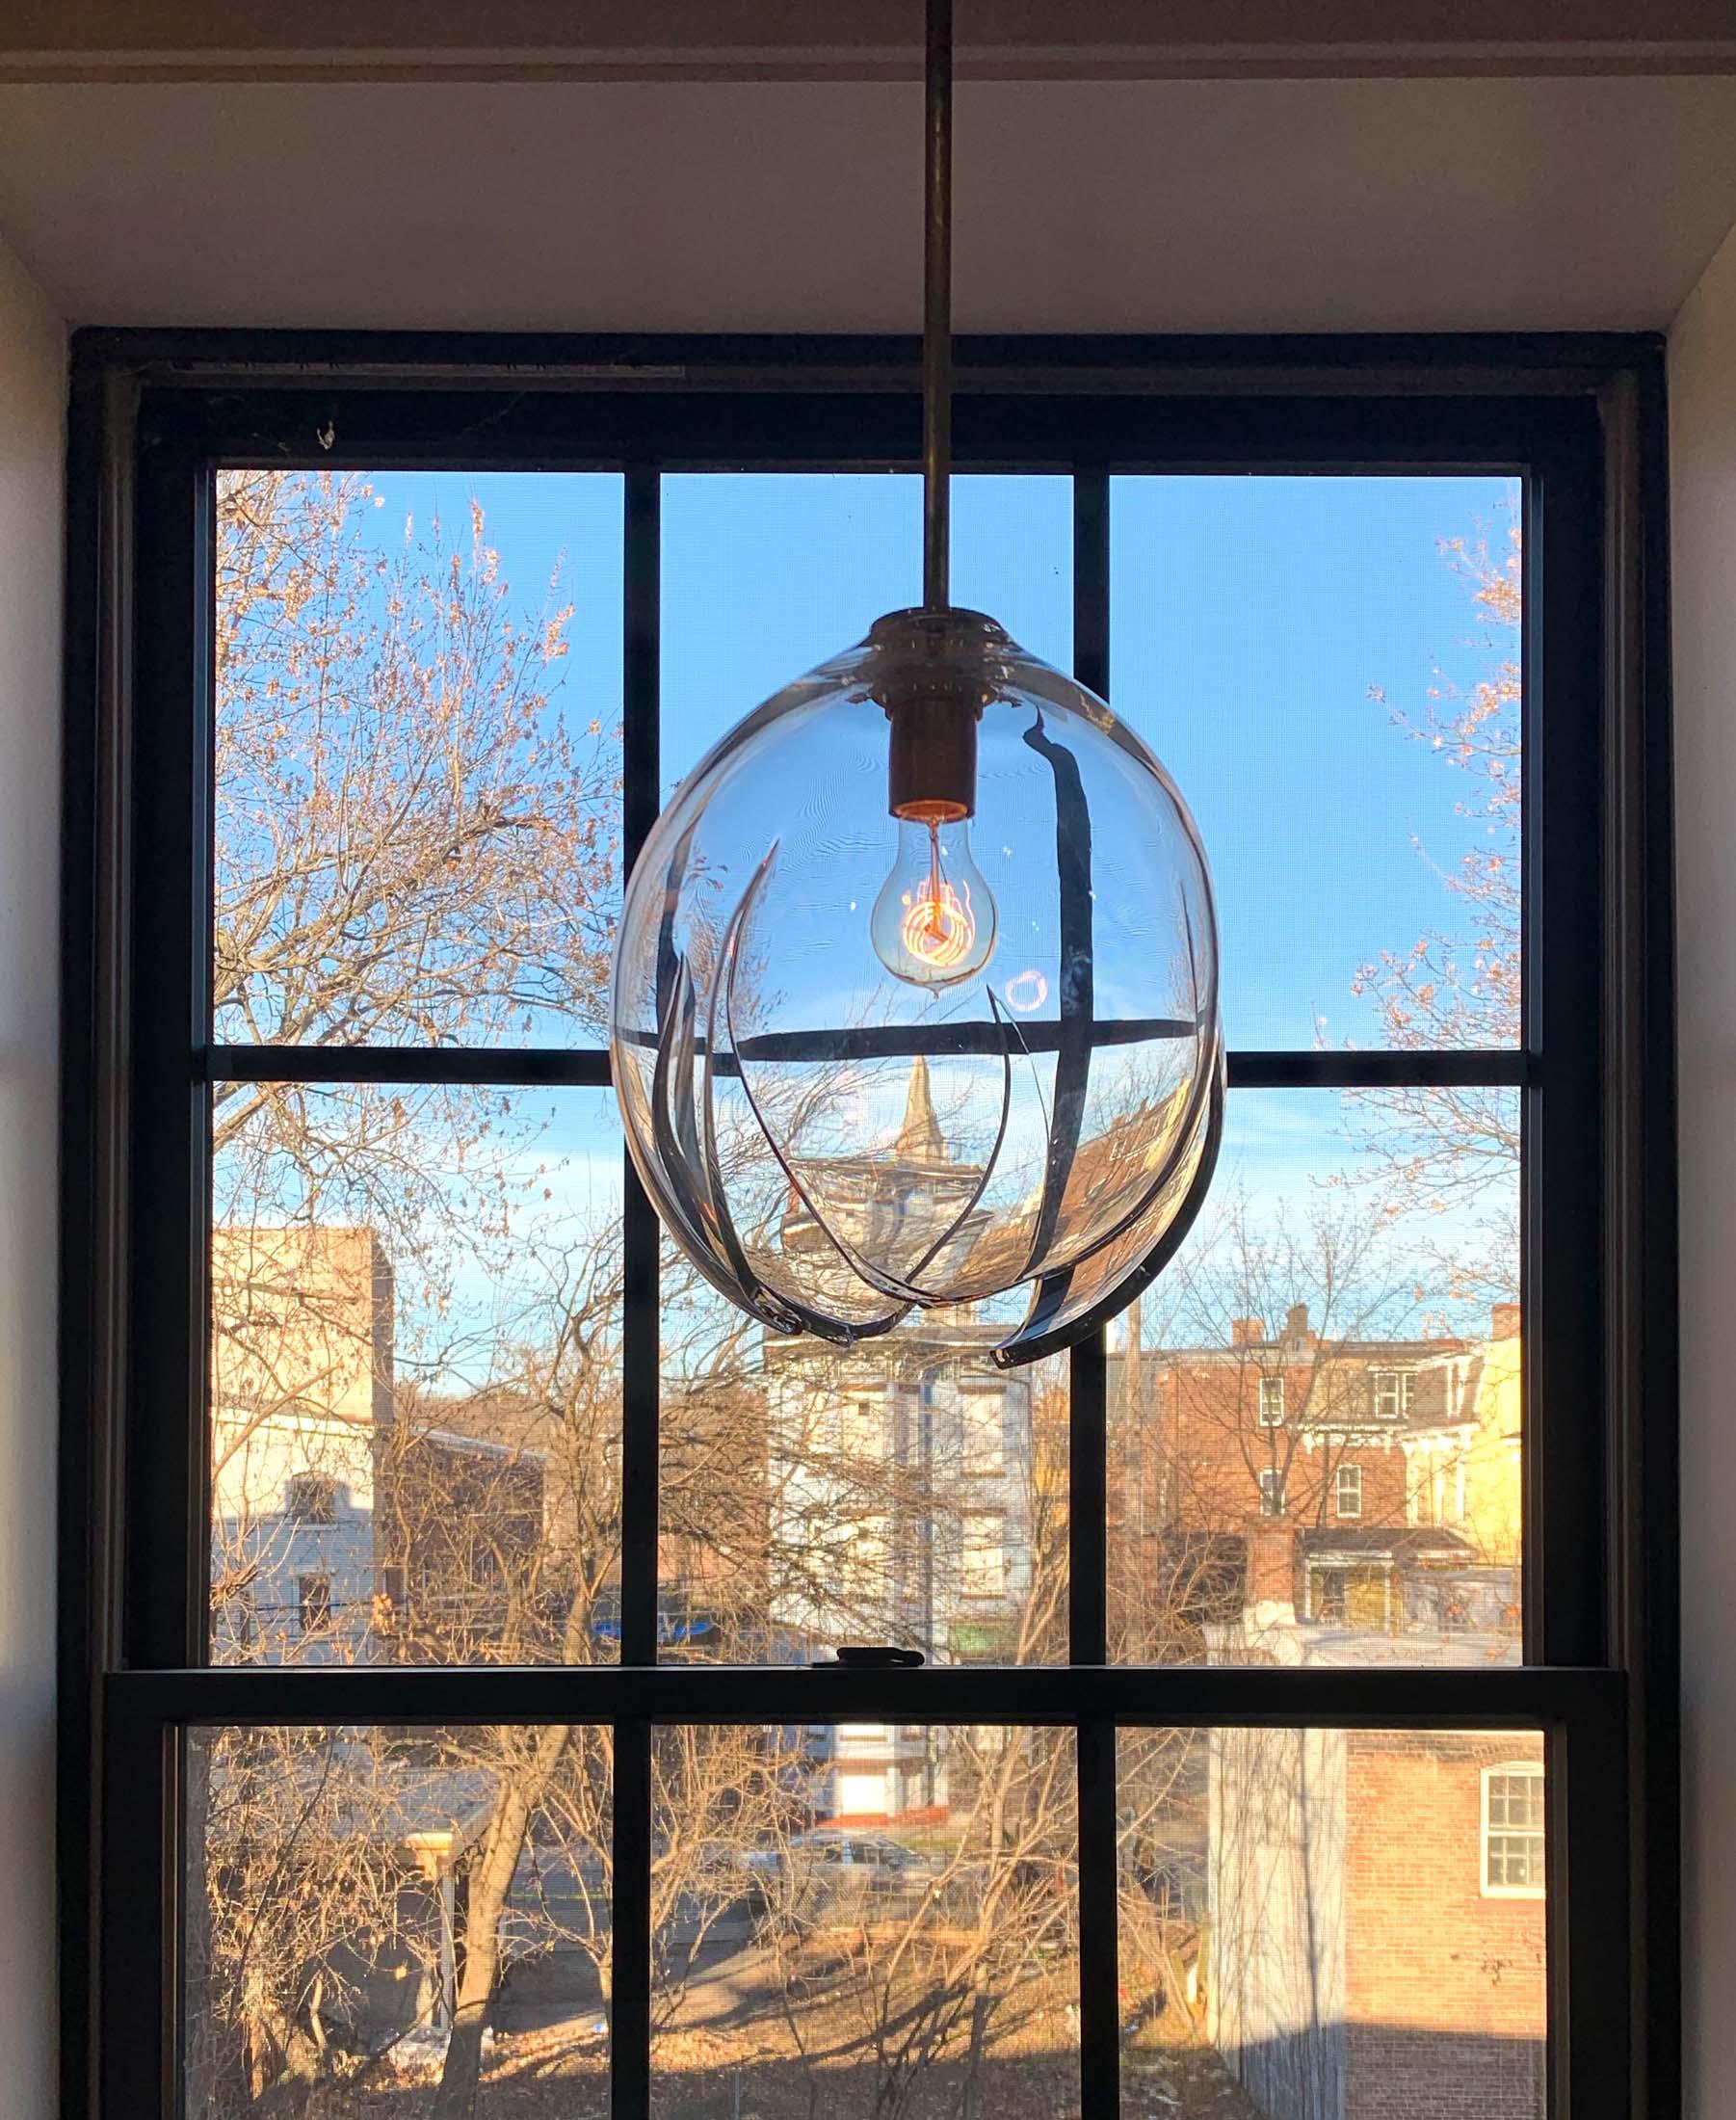 Release is an expressive light fixture formed using a delicate cooling technique to create a fractured opening. During the blowing process, an area of the form is meticulously cooled down until it naturally ruptures, thus releasing the stress